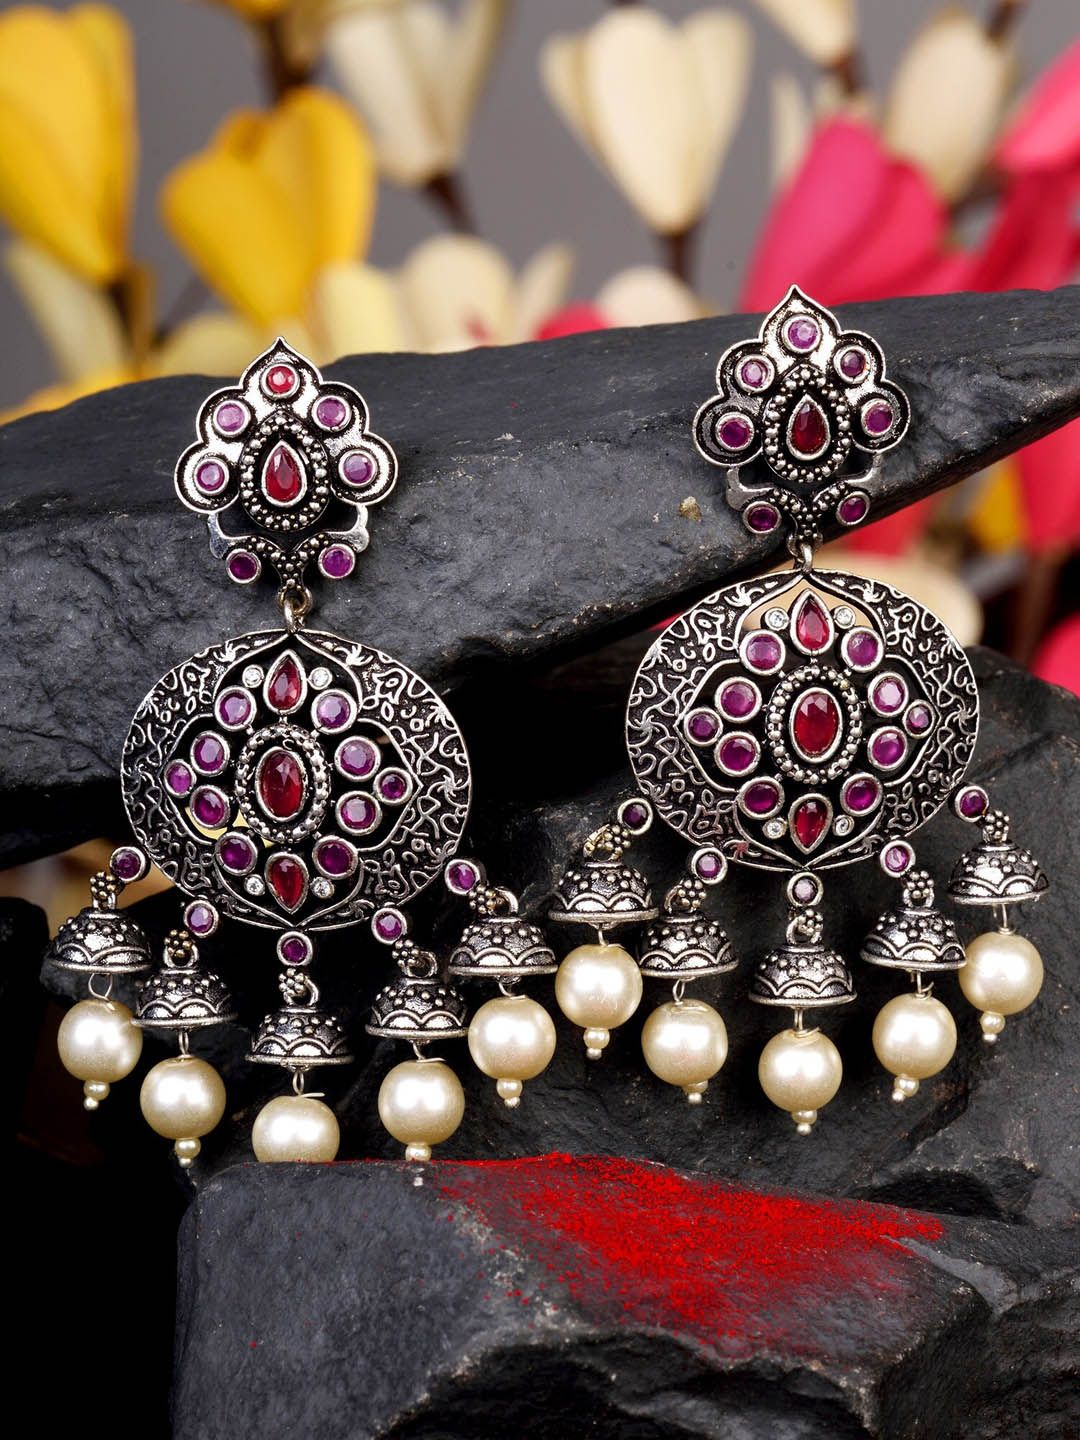 Saraf RS Jewellery Magenta & Silver-Toned Oxidised Floral Drop Earrings Price in India